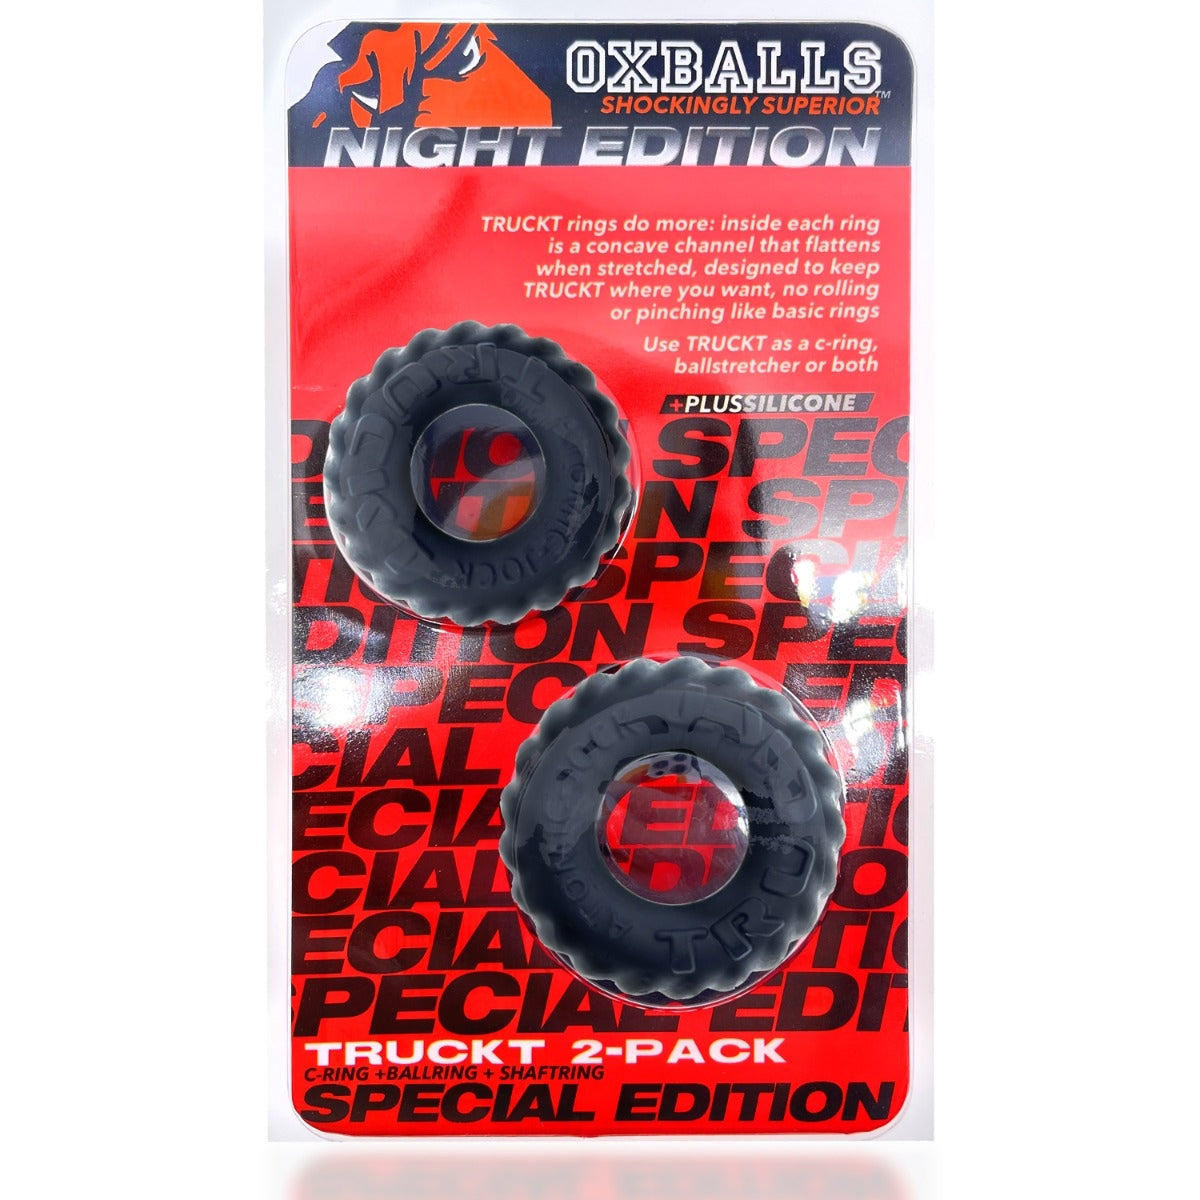 Oxballs Truckt Plus Silicone Cock Ring 2 Pack Special Edition Night